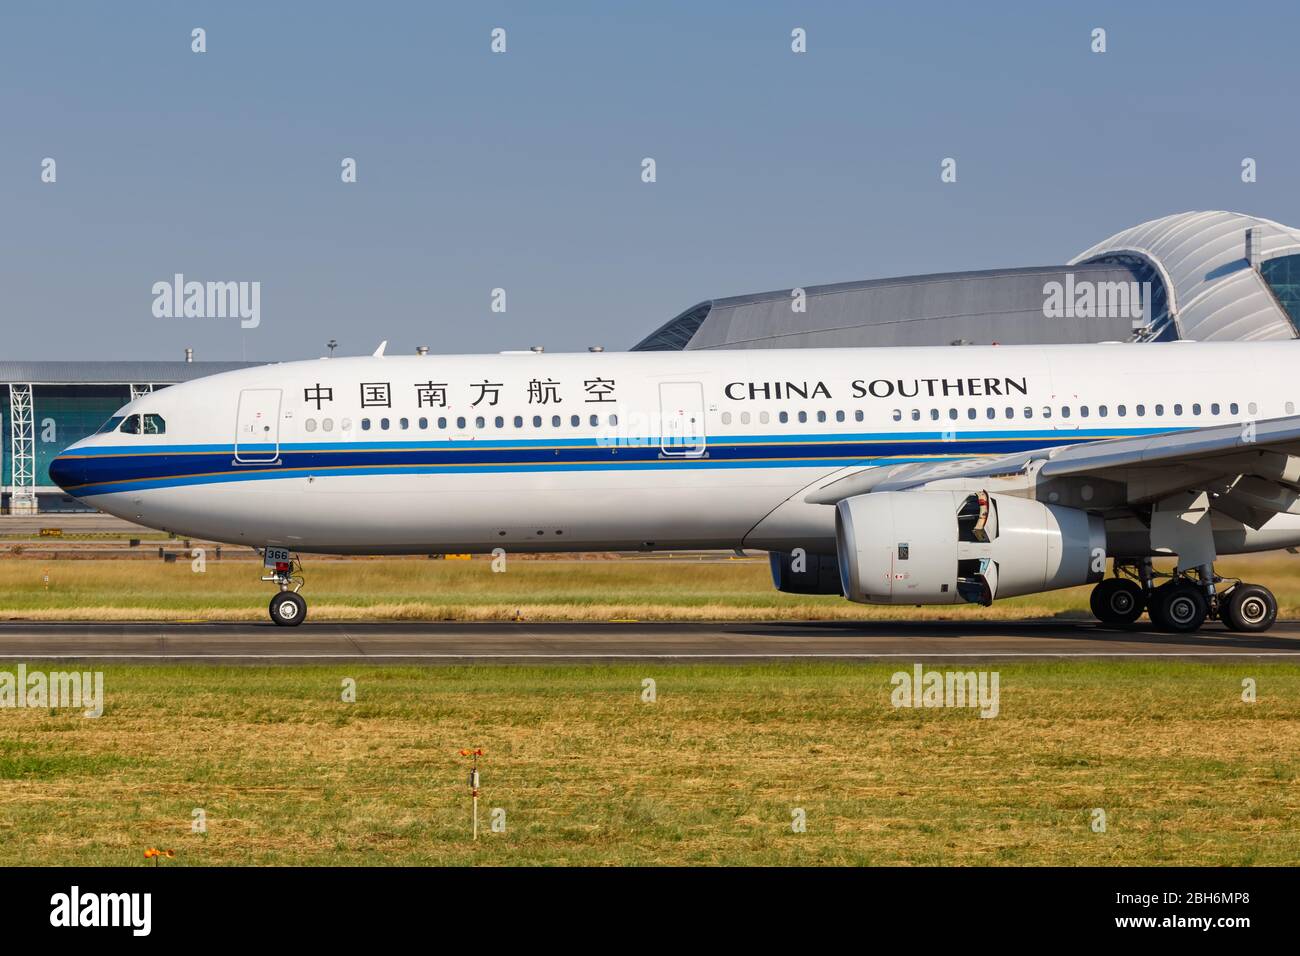 Guangzhou, China – September 24, 2019: China Southern Airlines Airbus A330-300 airplane at Guangzhou Baiyun airport (CAN) in China. Airbus is a Europe Stock Photo